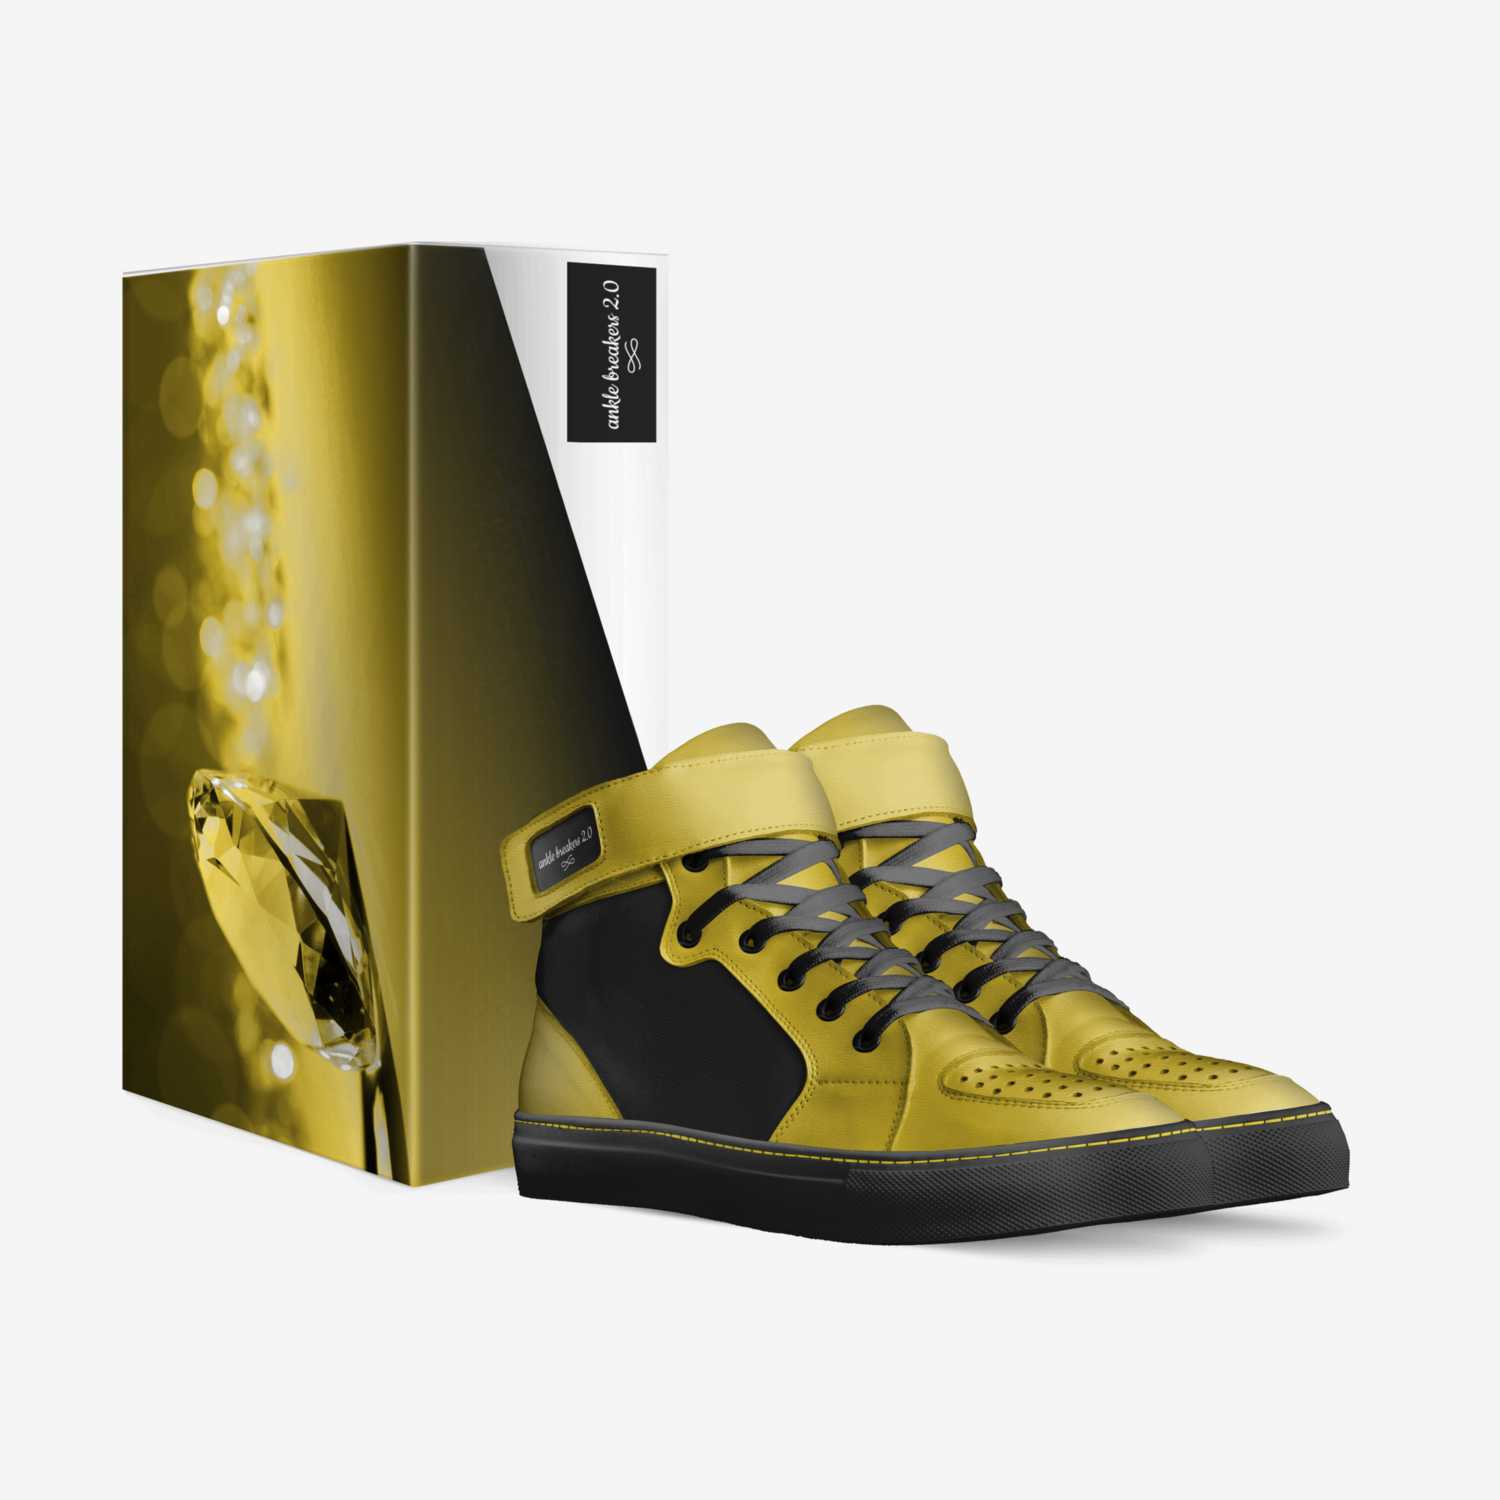 ankle breakers 2.0 custom made in Italy shoes by Gregory Francis | Box view